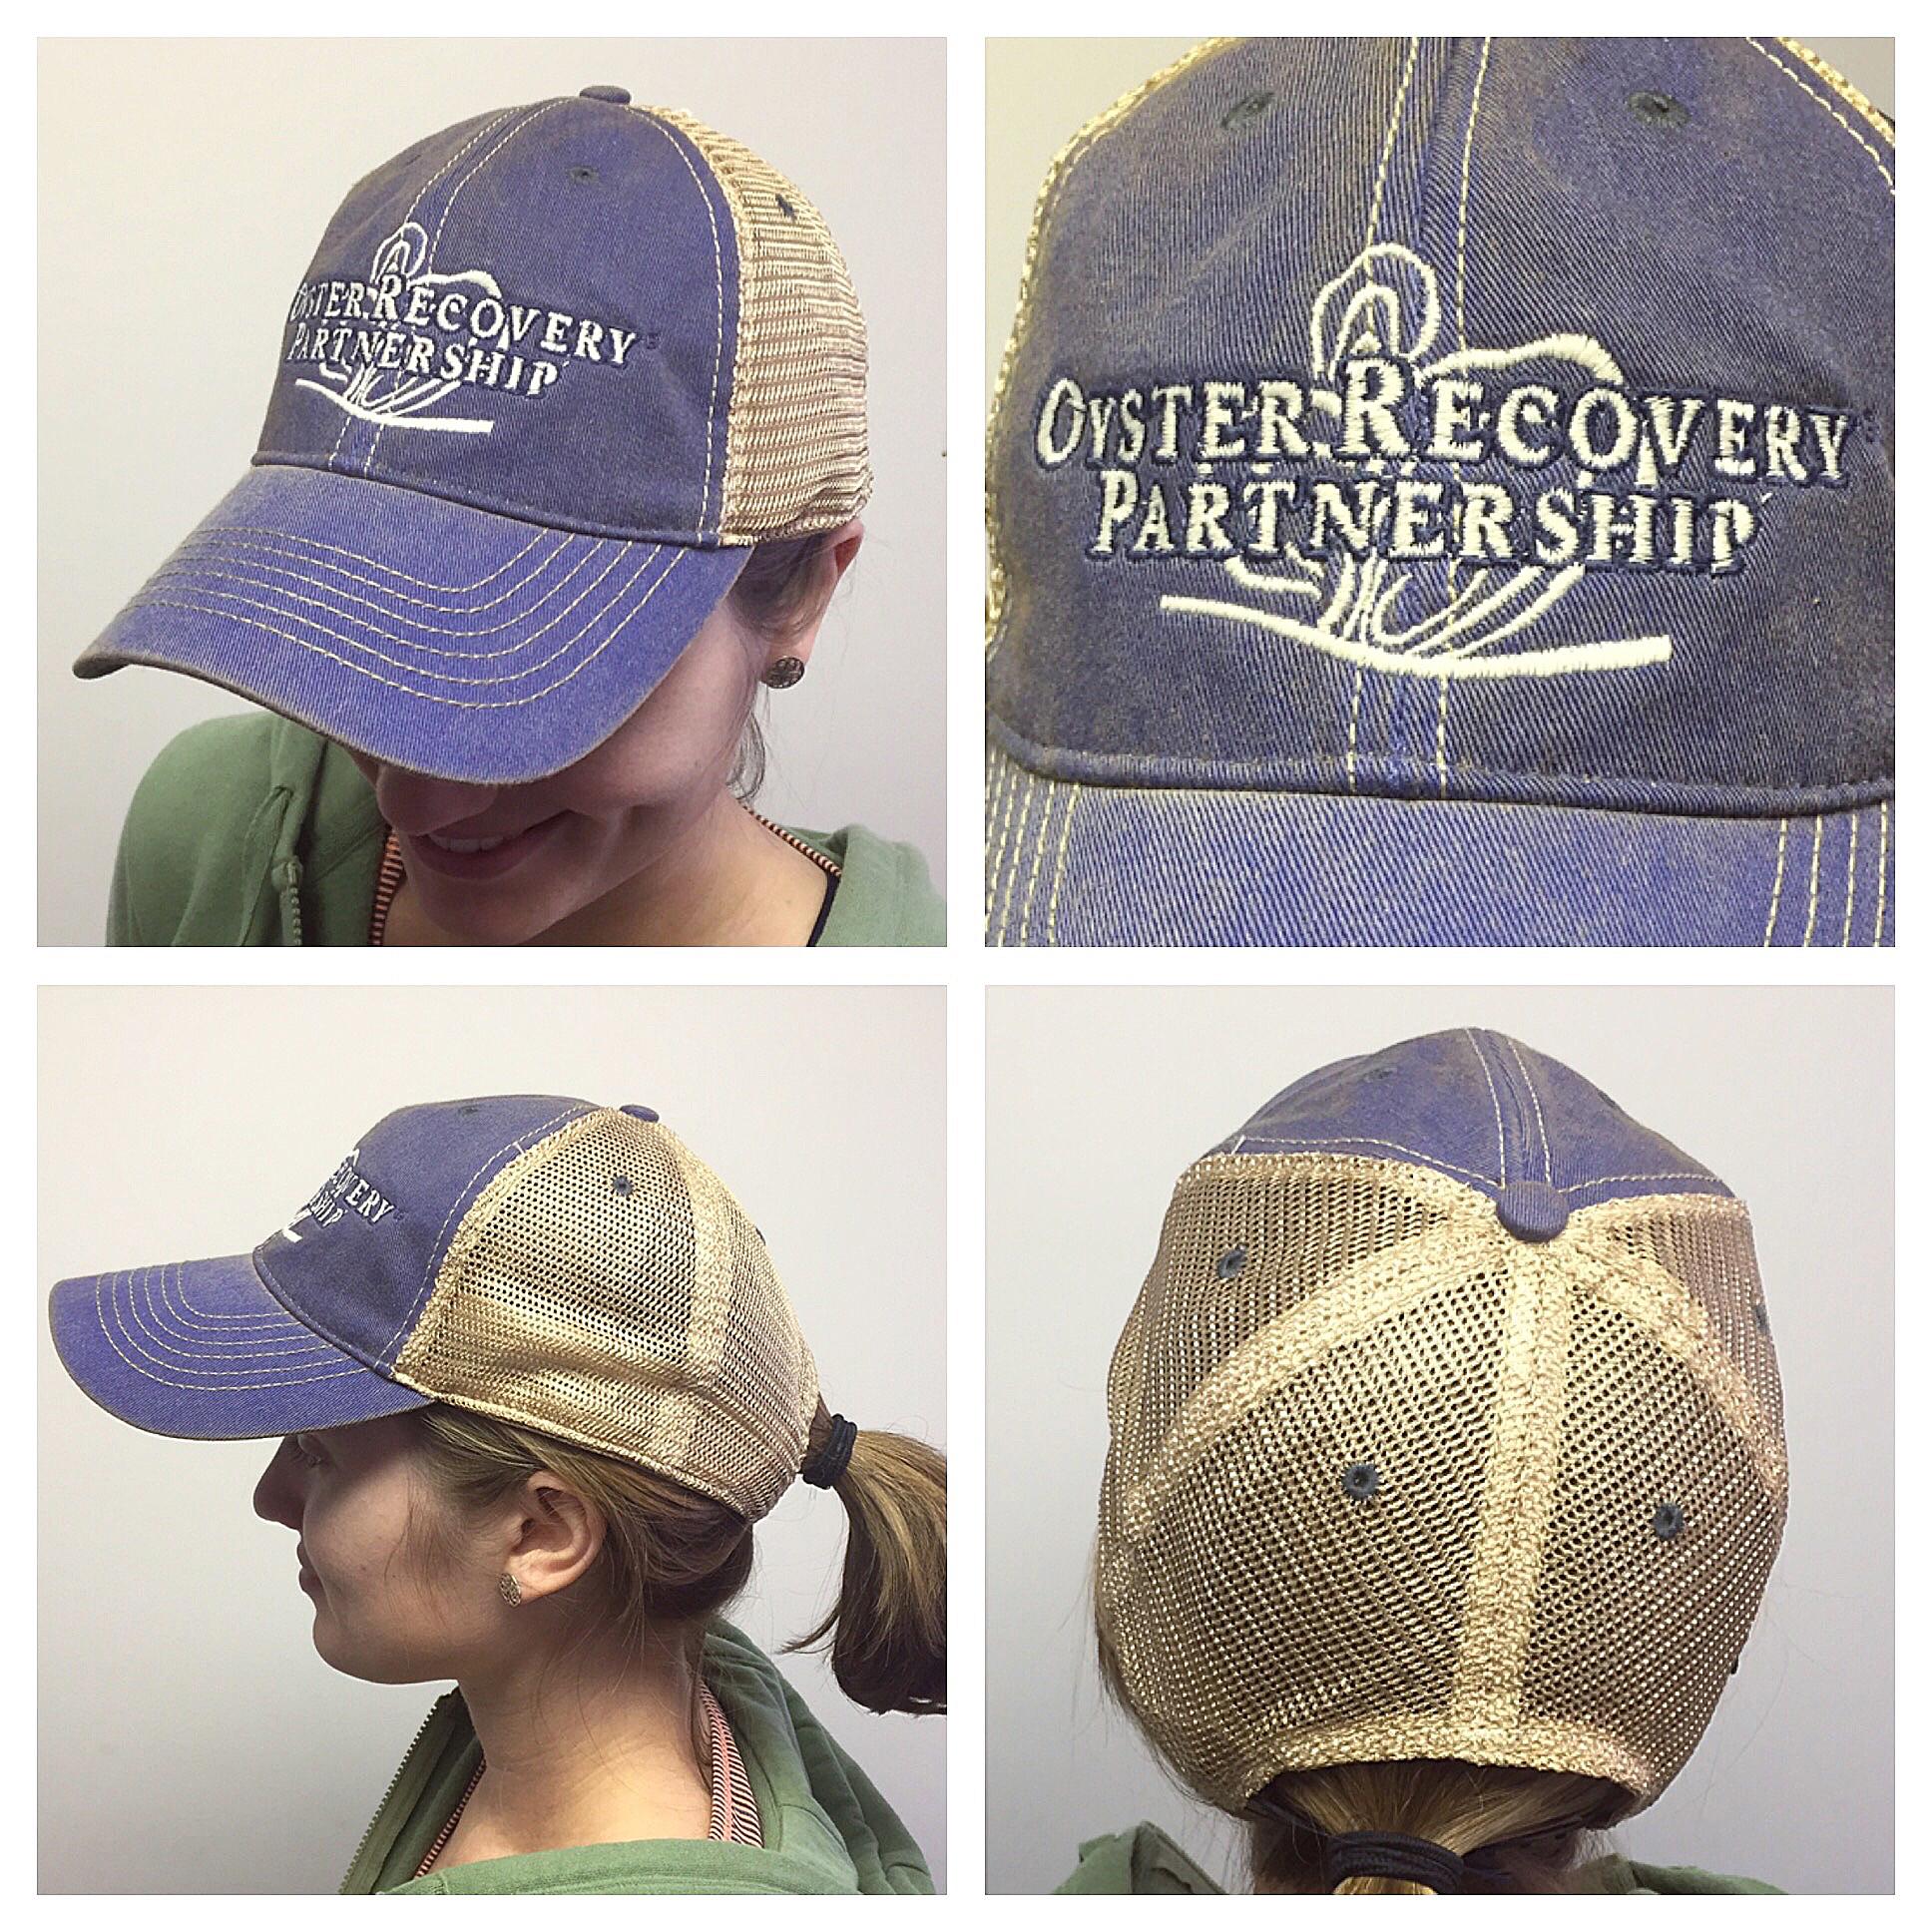 ORP hats